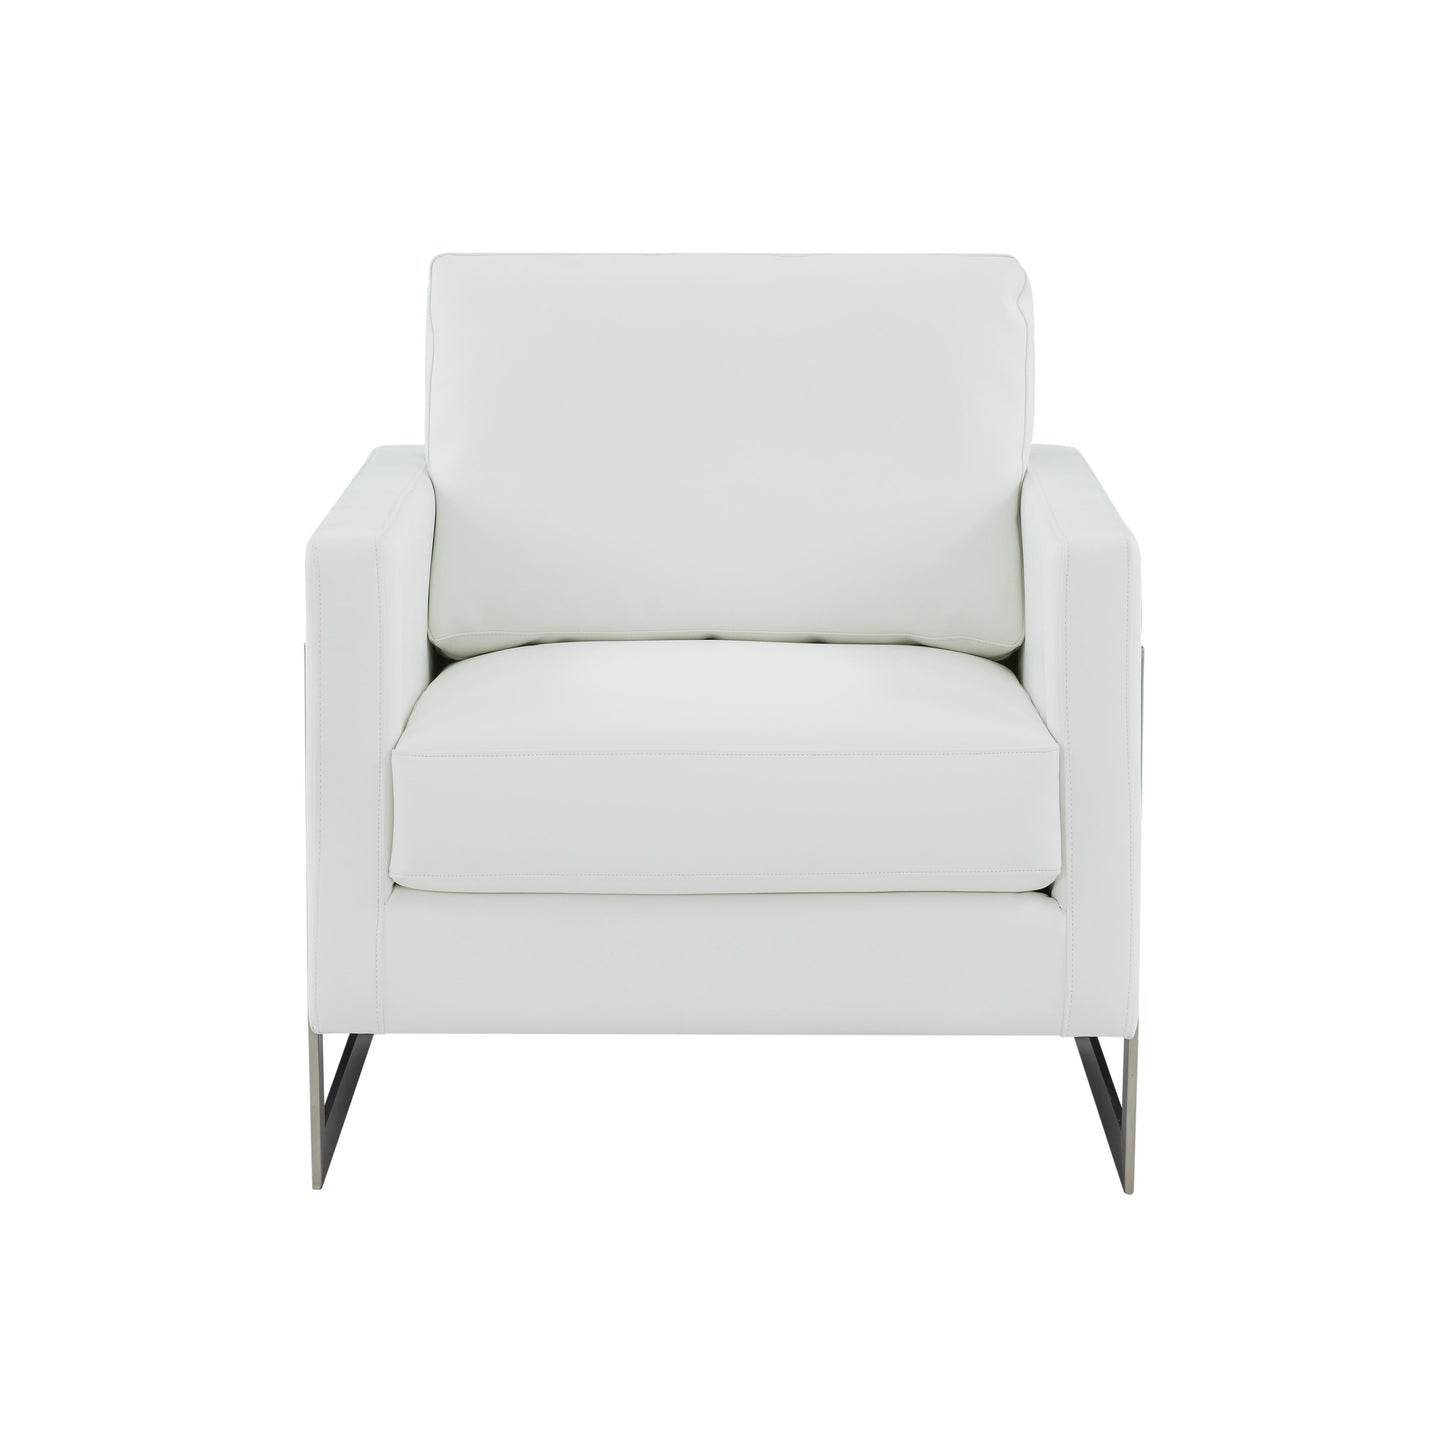 Modrest Prince - Contemporary White + Silver Leather Accent Chair